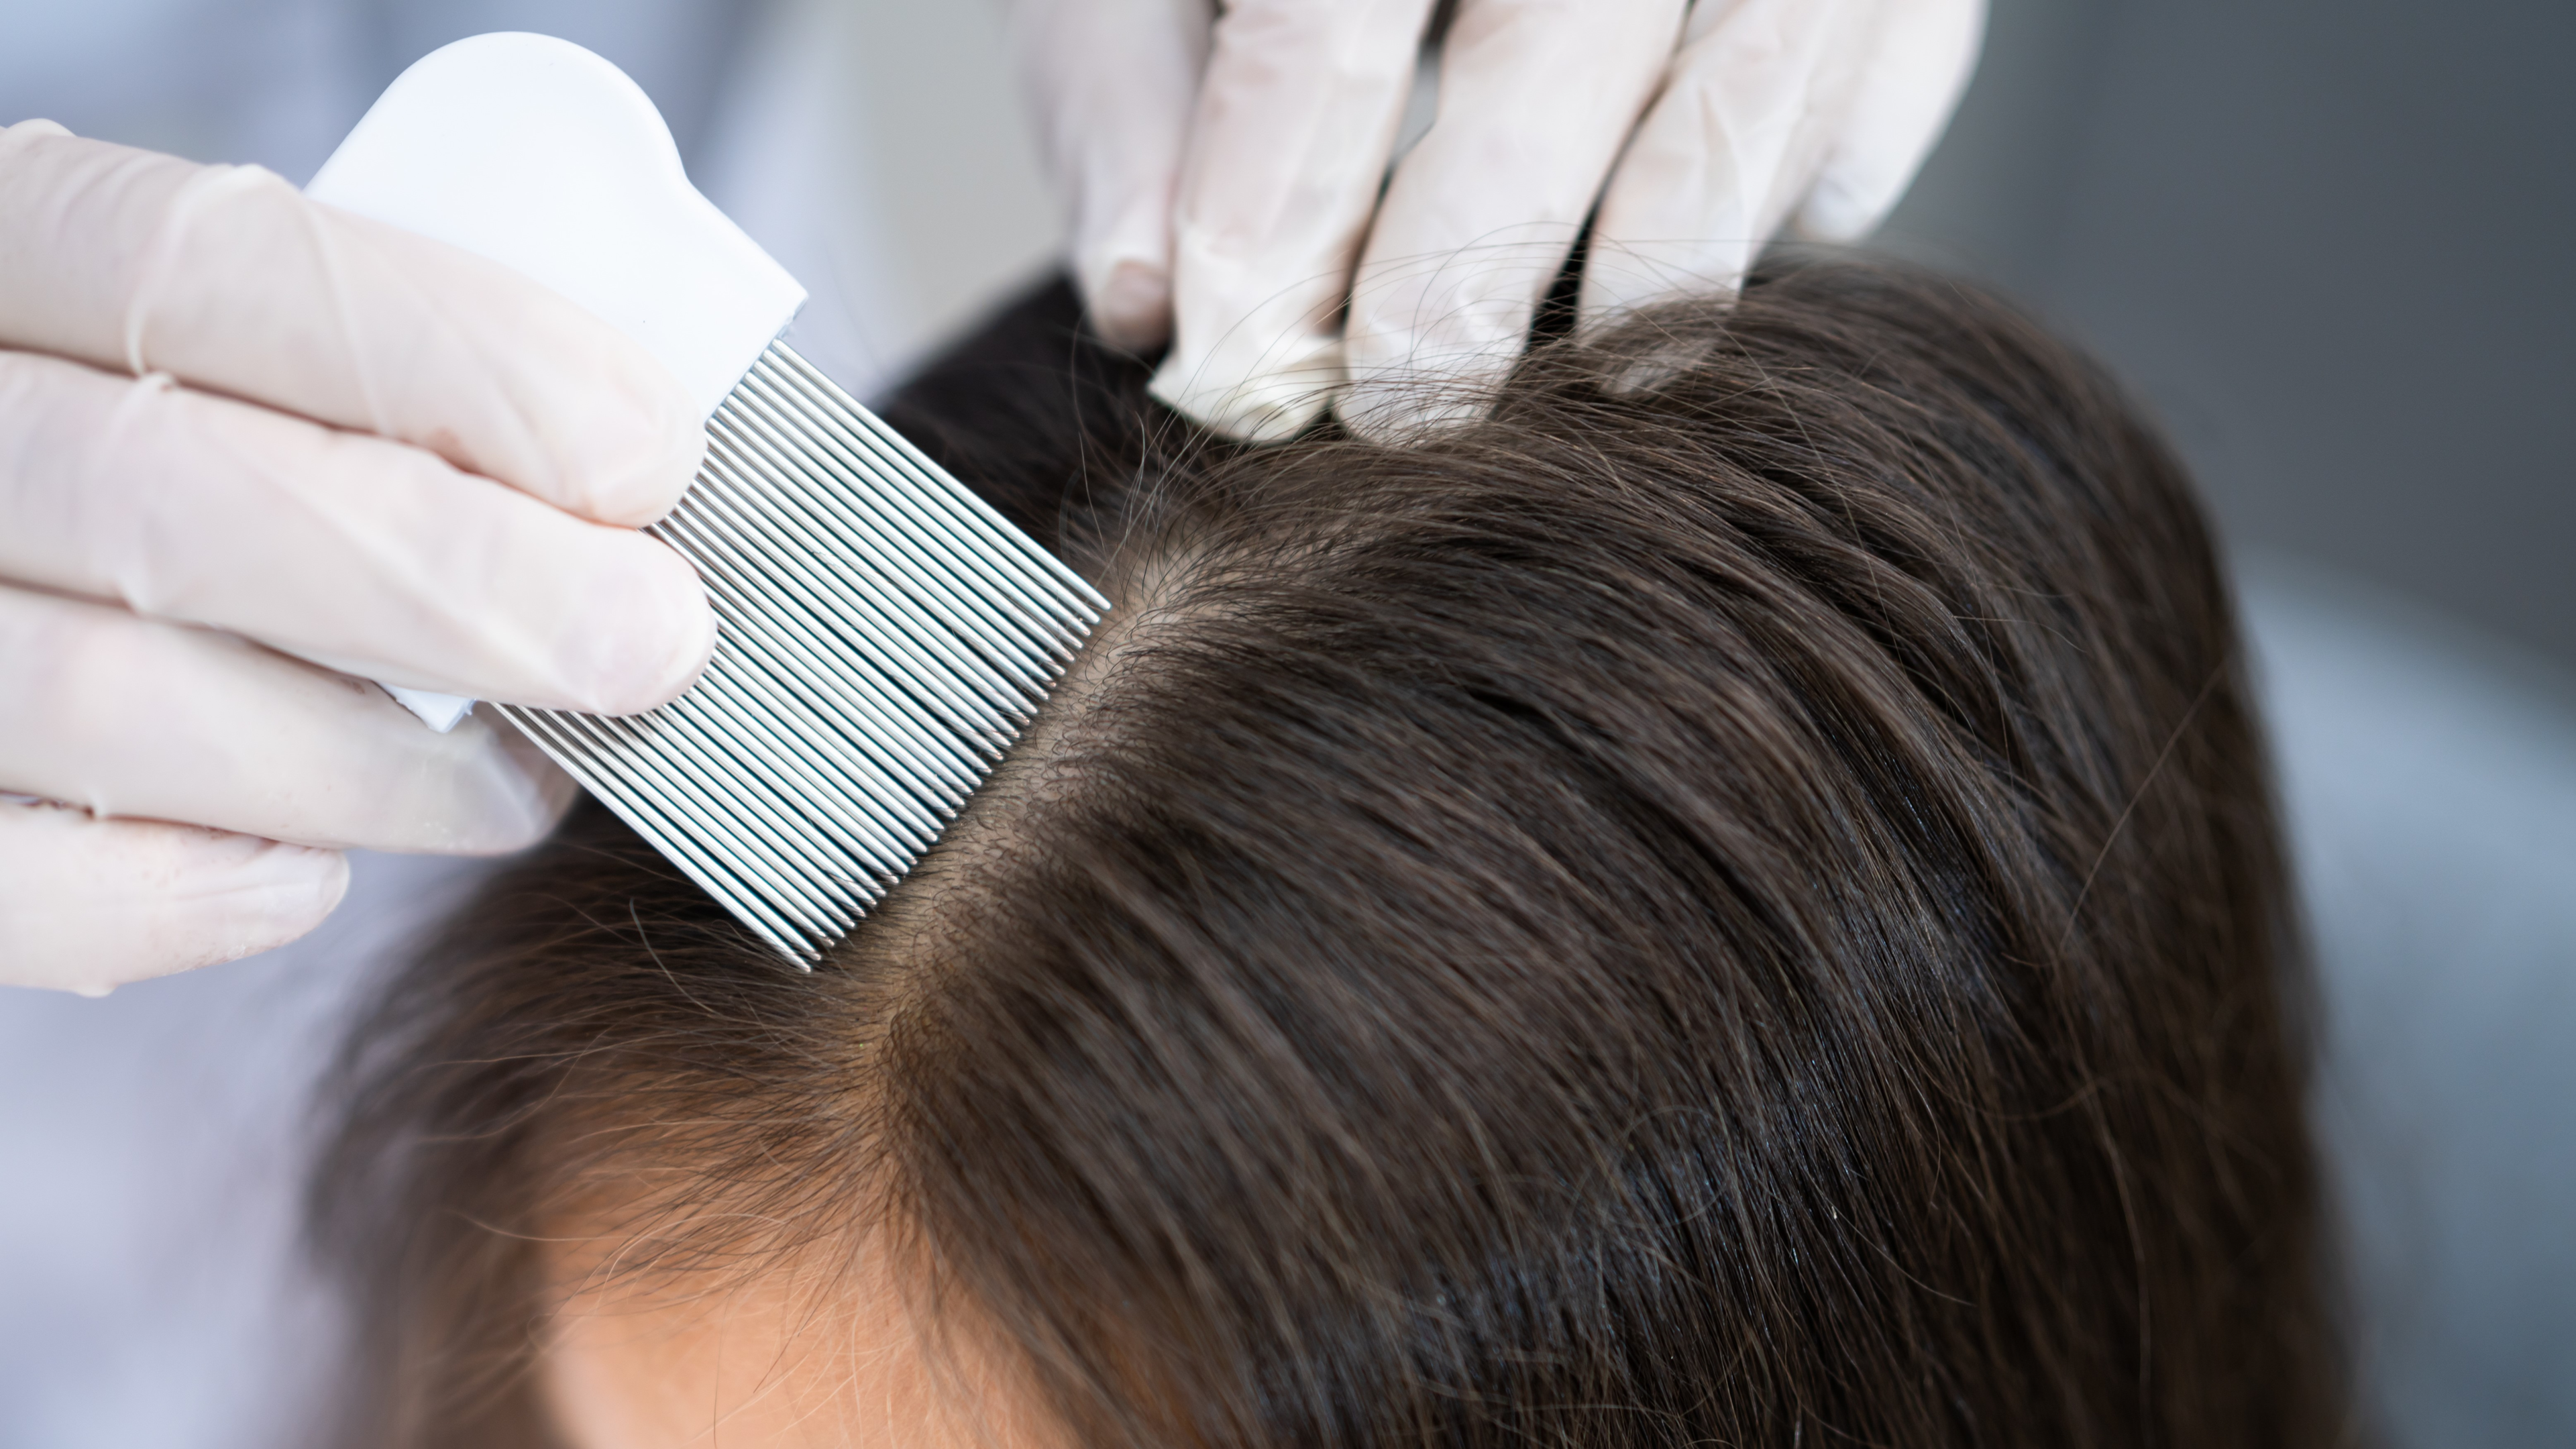 microneedling and dermarolling on scalp for women with thinning hairs